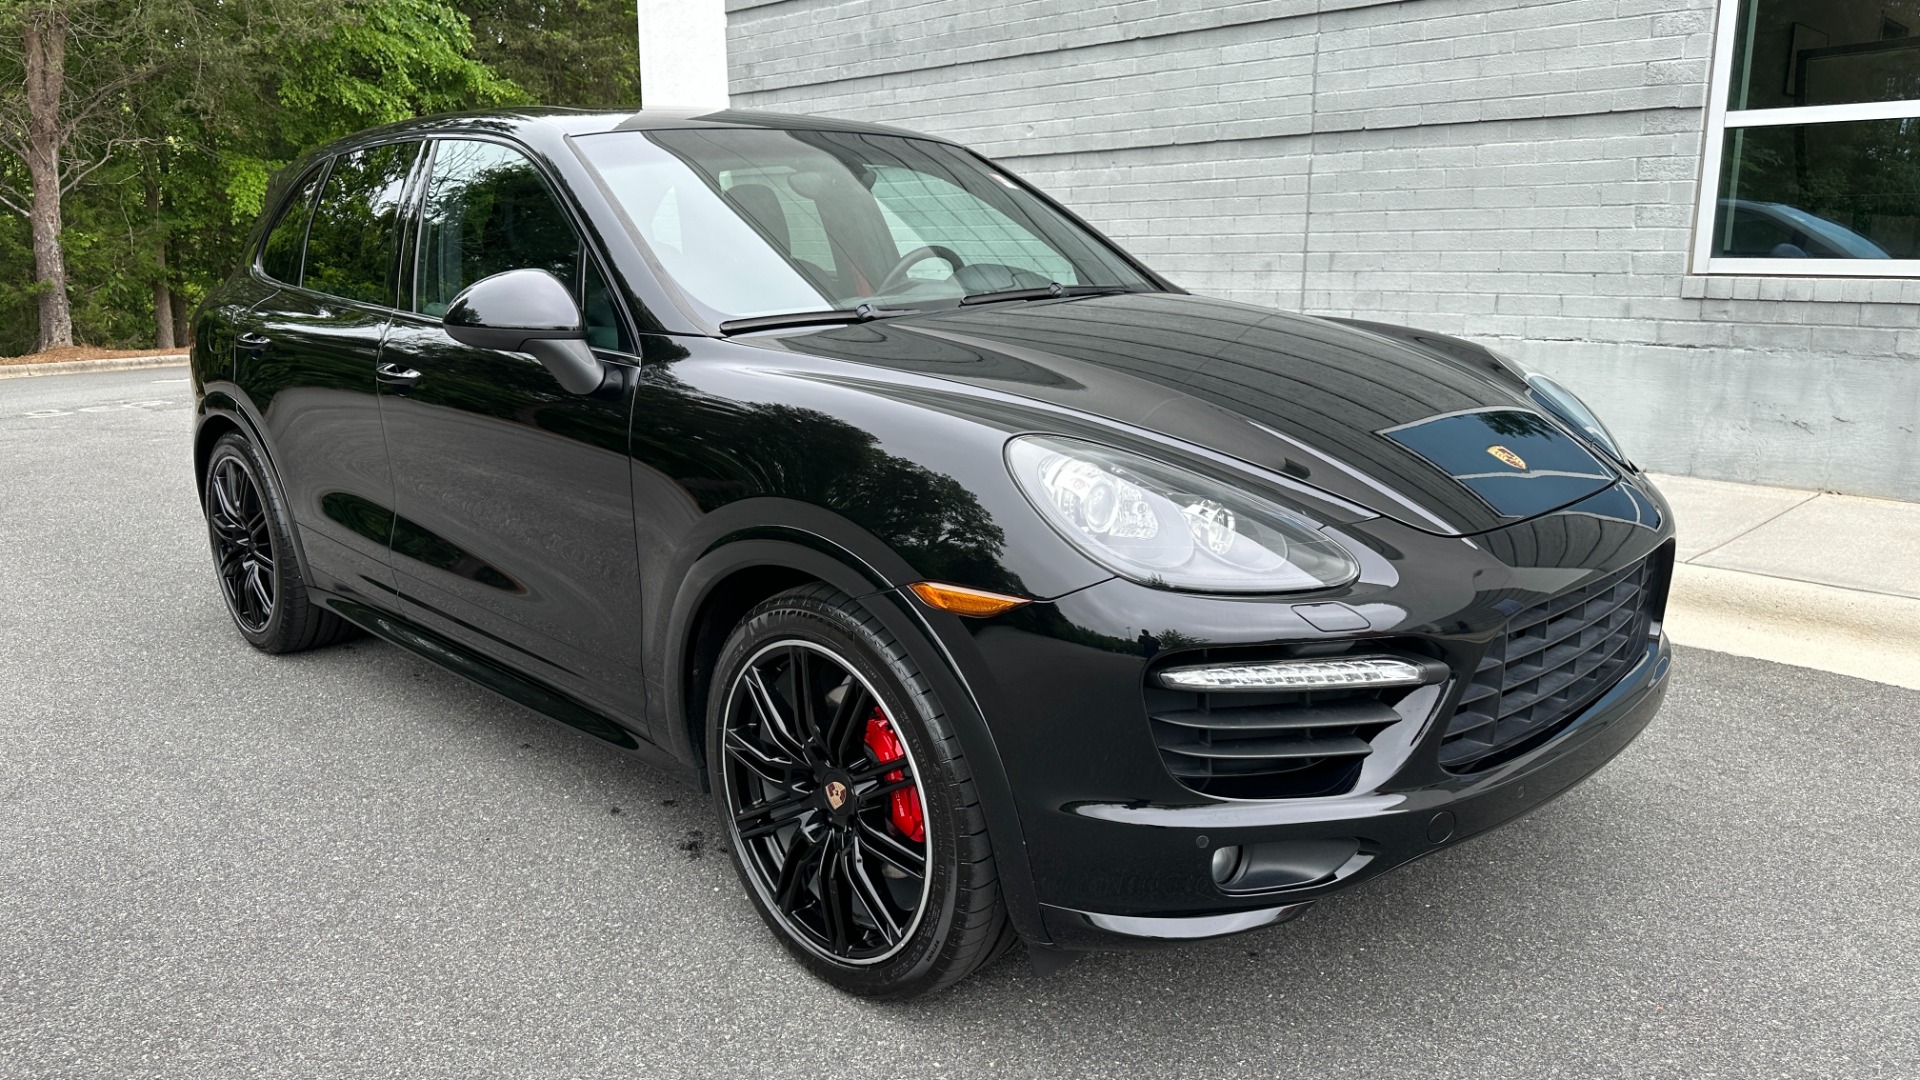 Used 2014 Porsche Cayenne GTS / SPORT WHEELS / COMFORT PKG / PANORAMIC ROOF for sale $31,995 at Formula Imports in Charlotte NC 28227 5